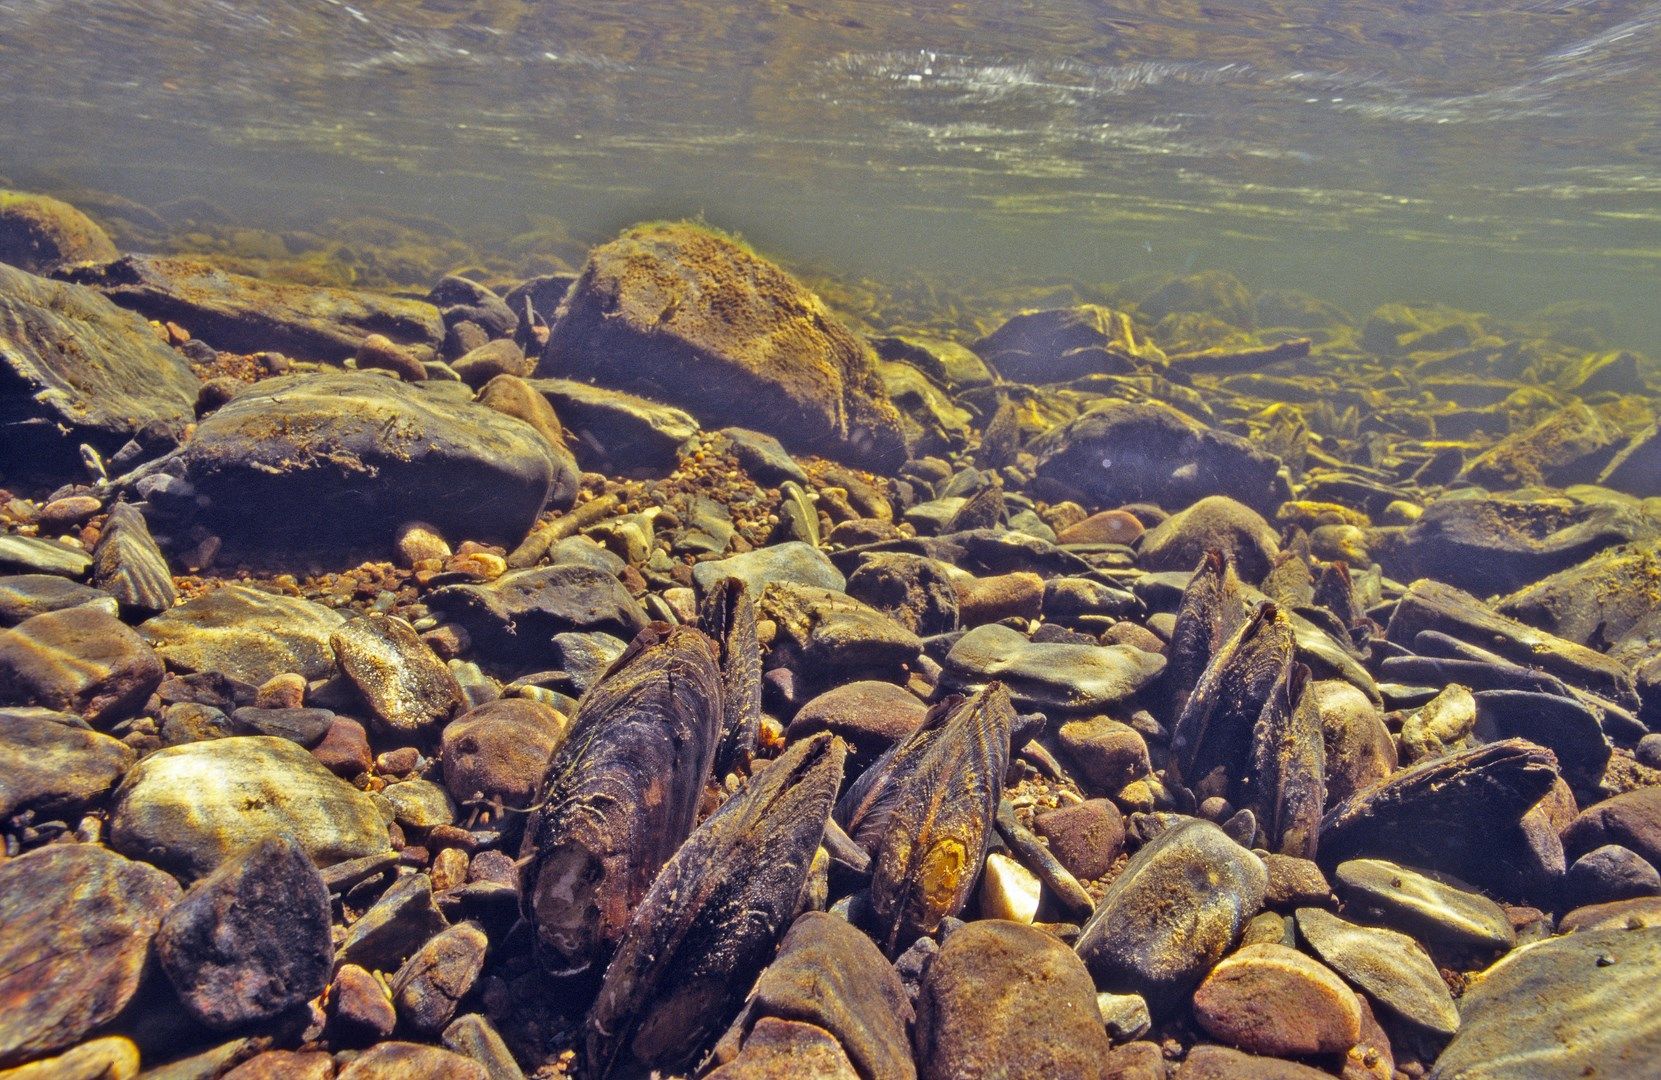 A river bed with freshwater pearl mussels in the foreground